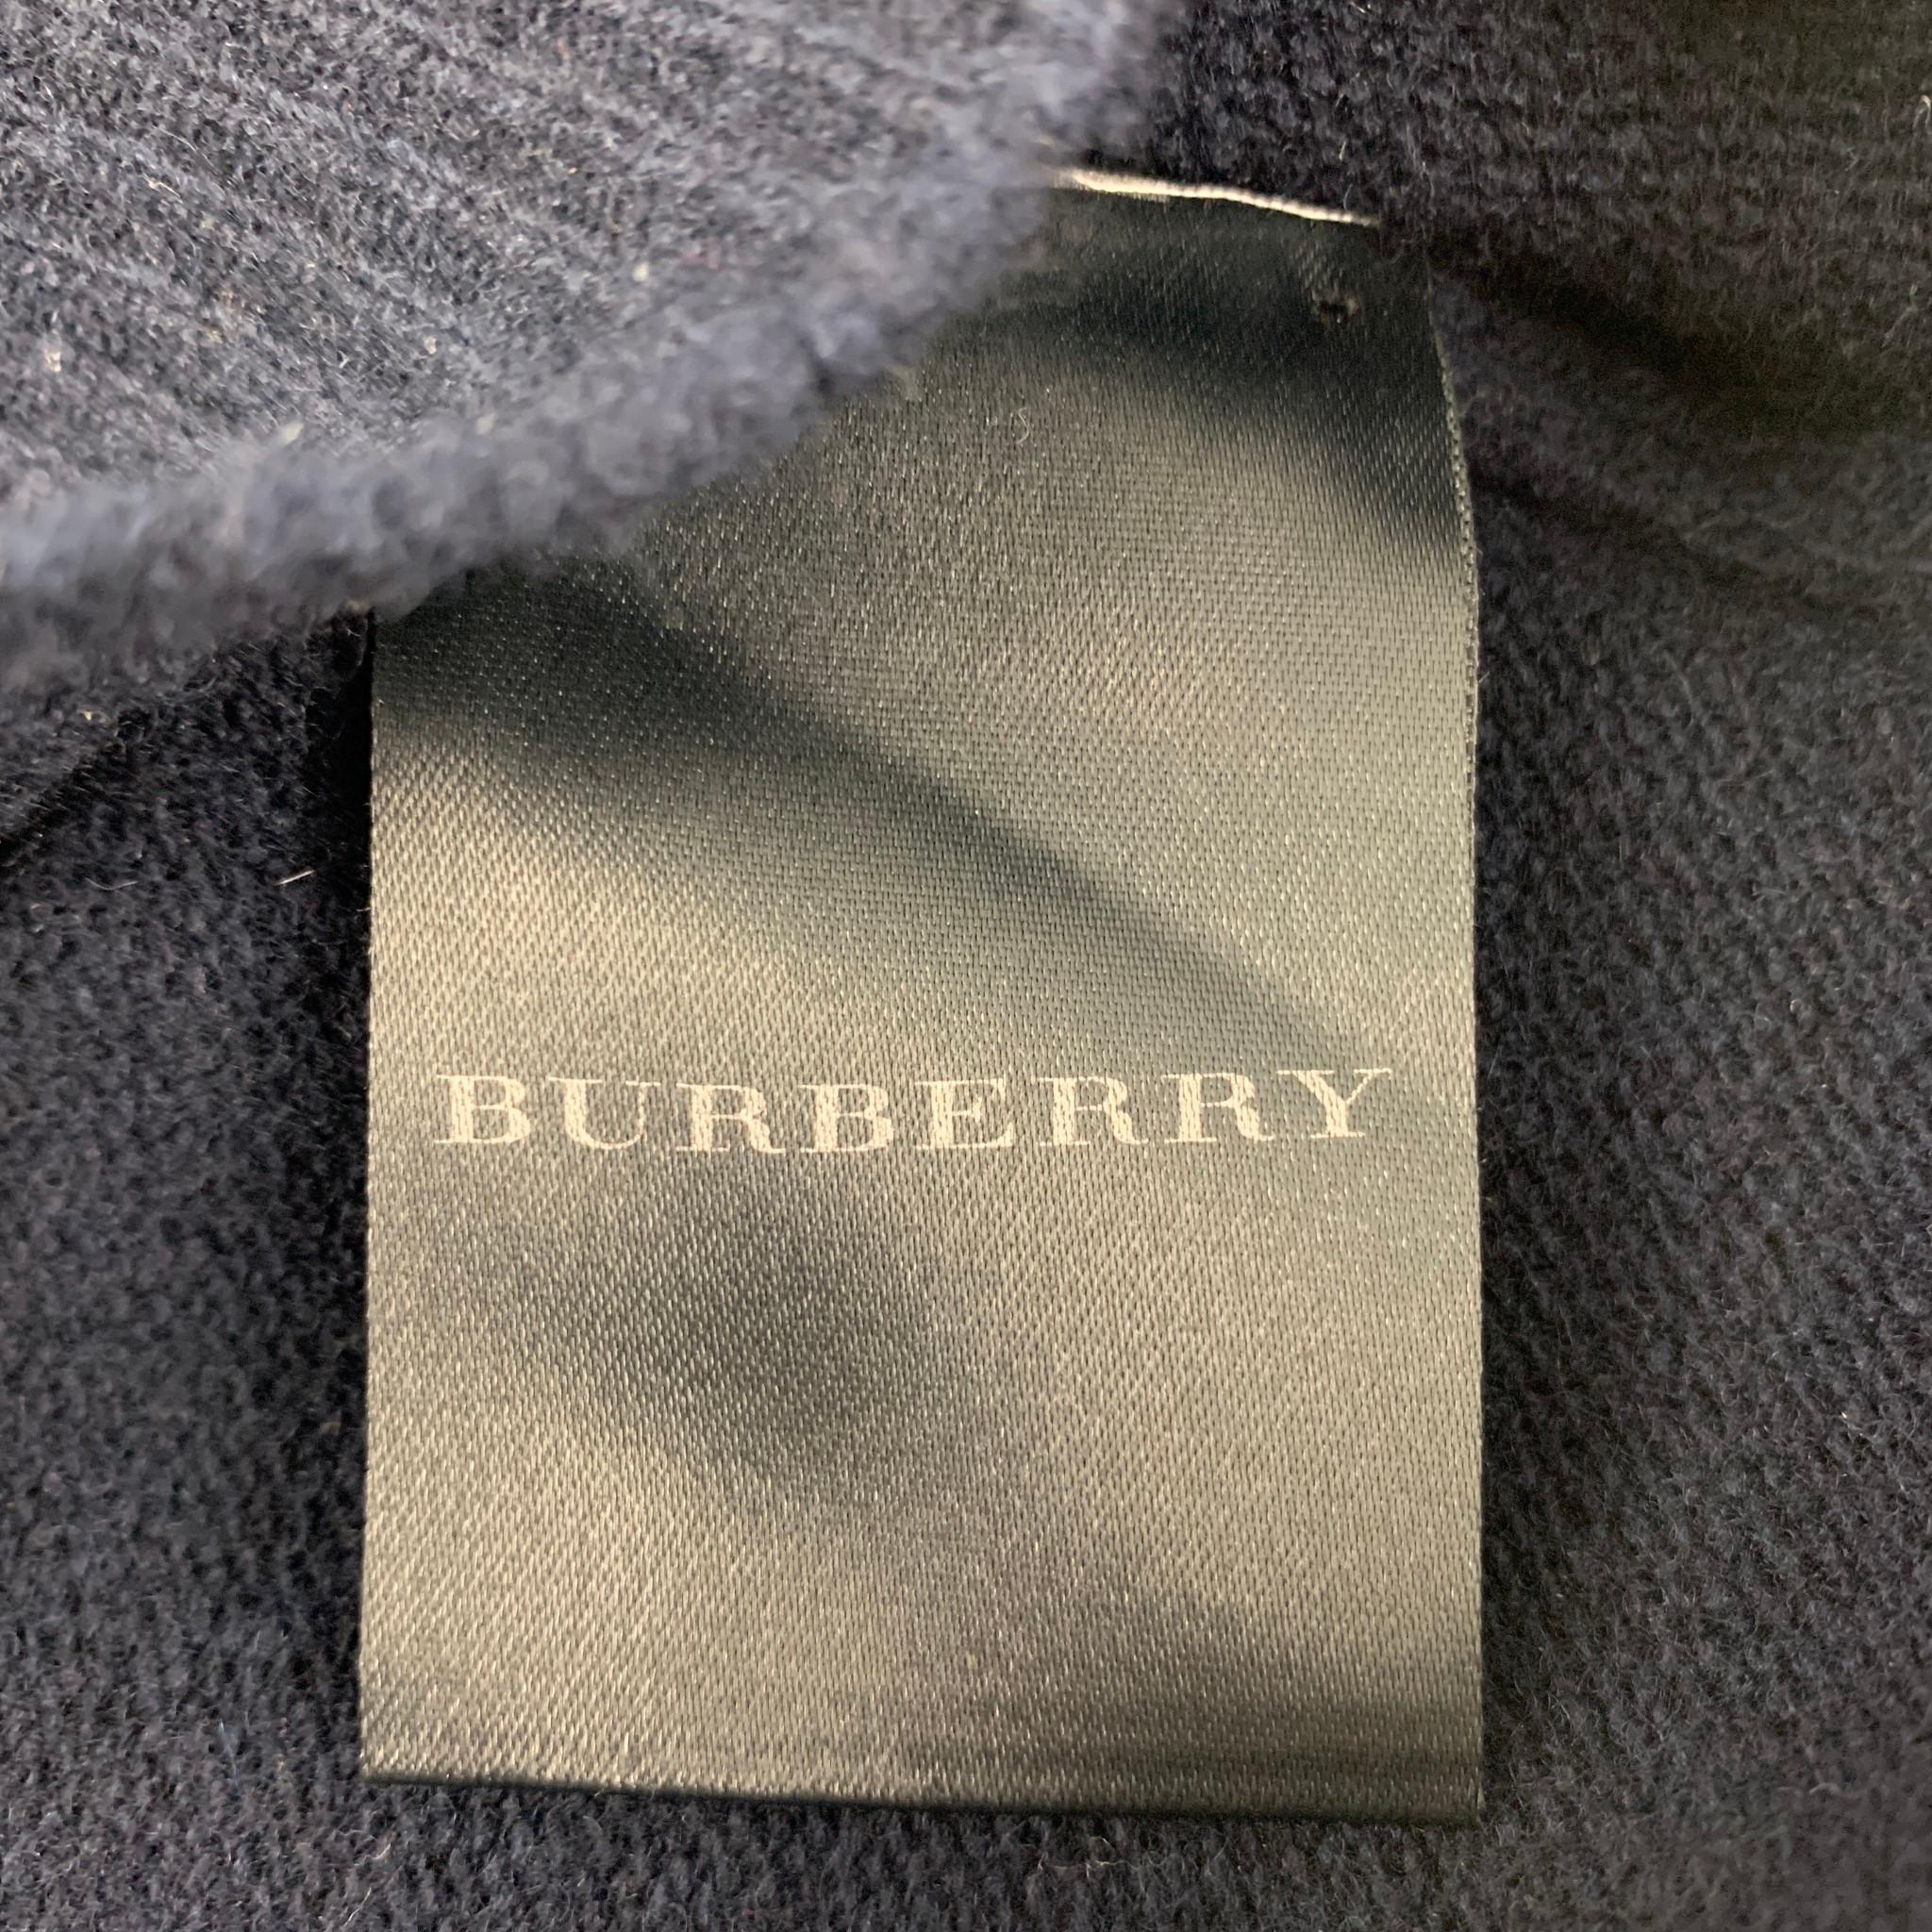 Men's BURBERRY PRORSUM Fall Winter 2010 Size S Navy Knitted Wool Crew-Neck Sweater